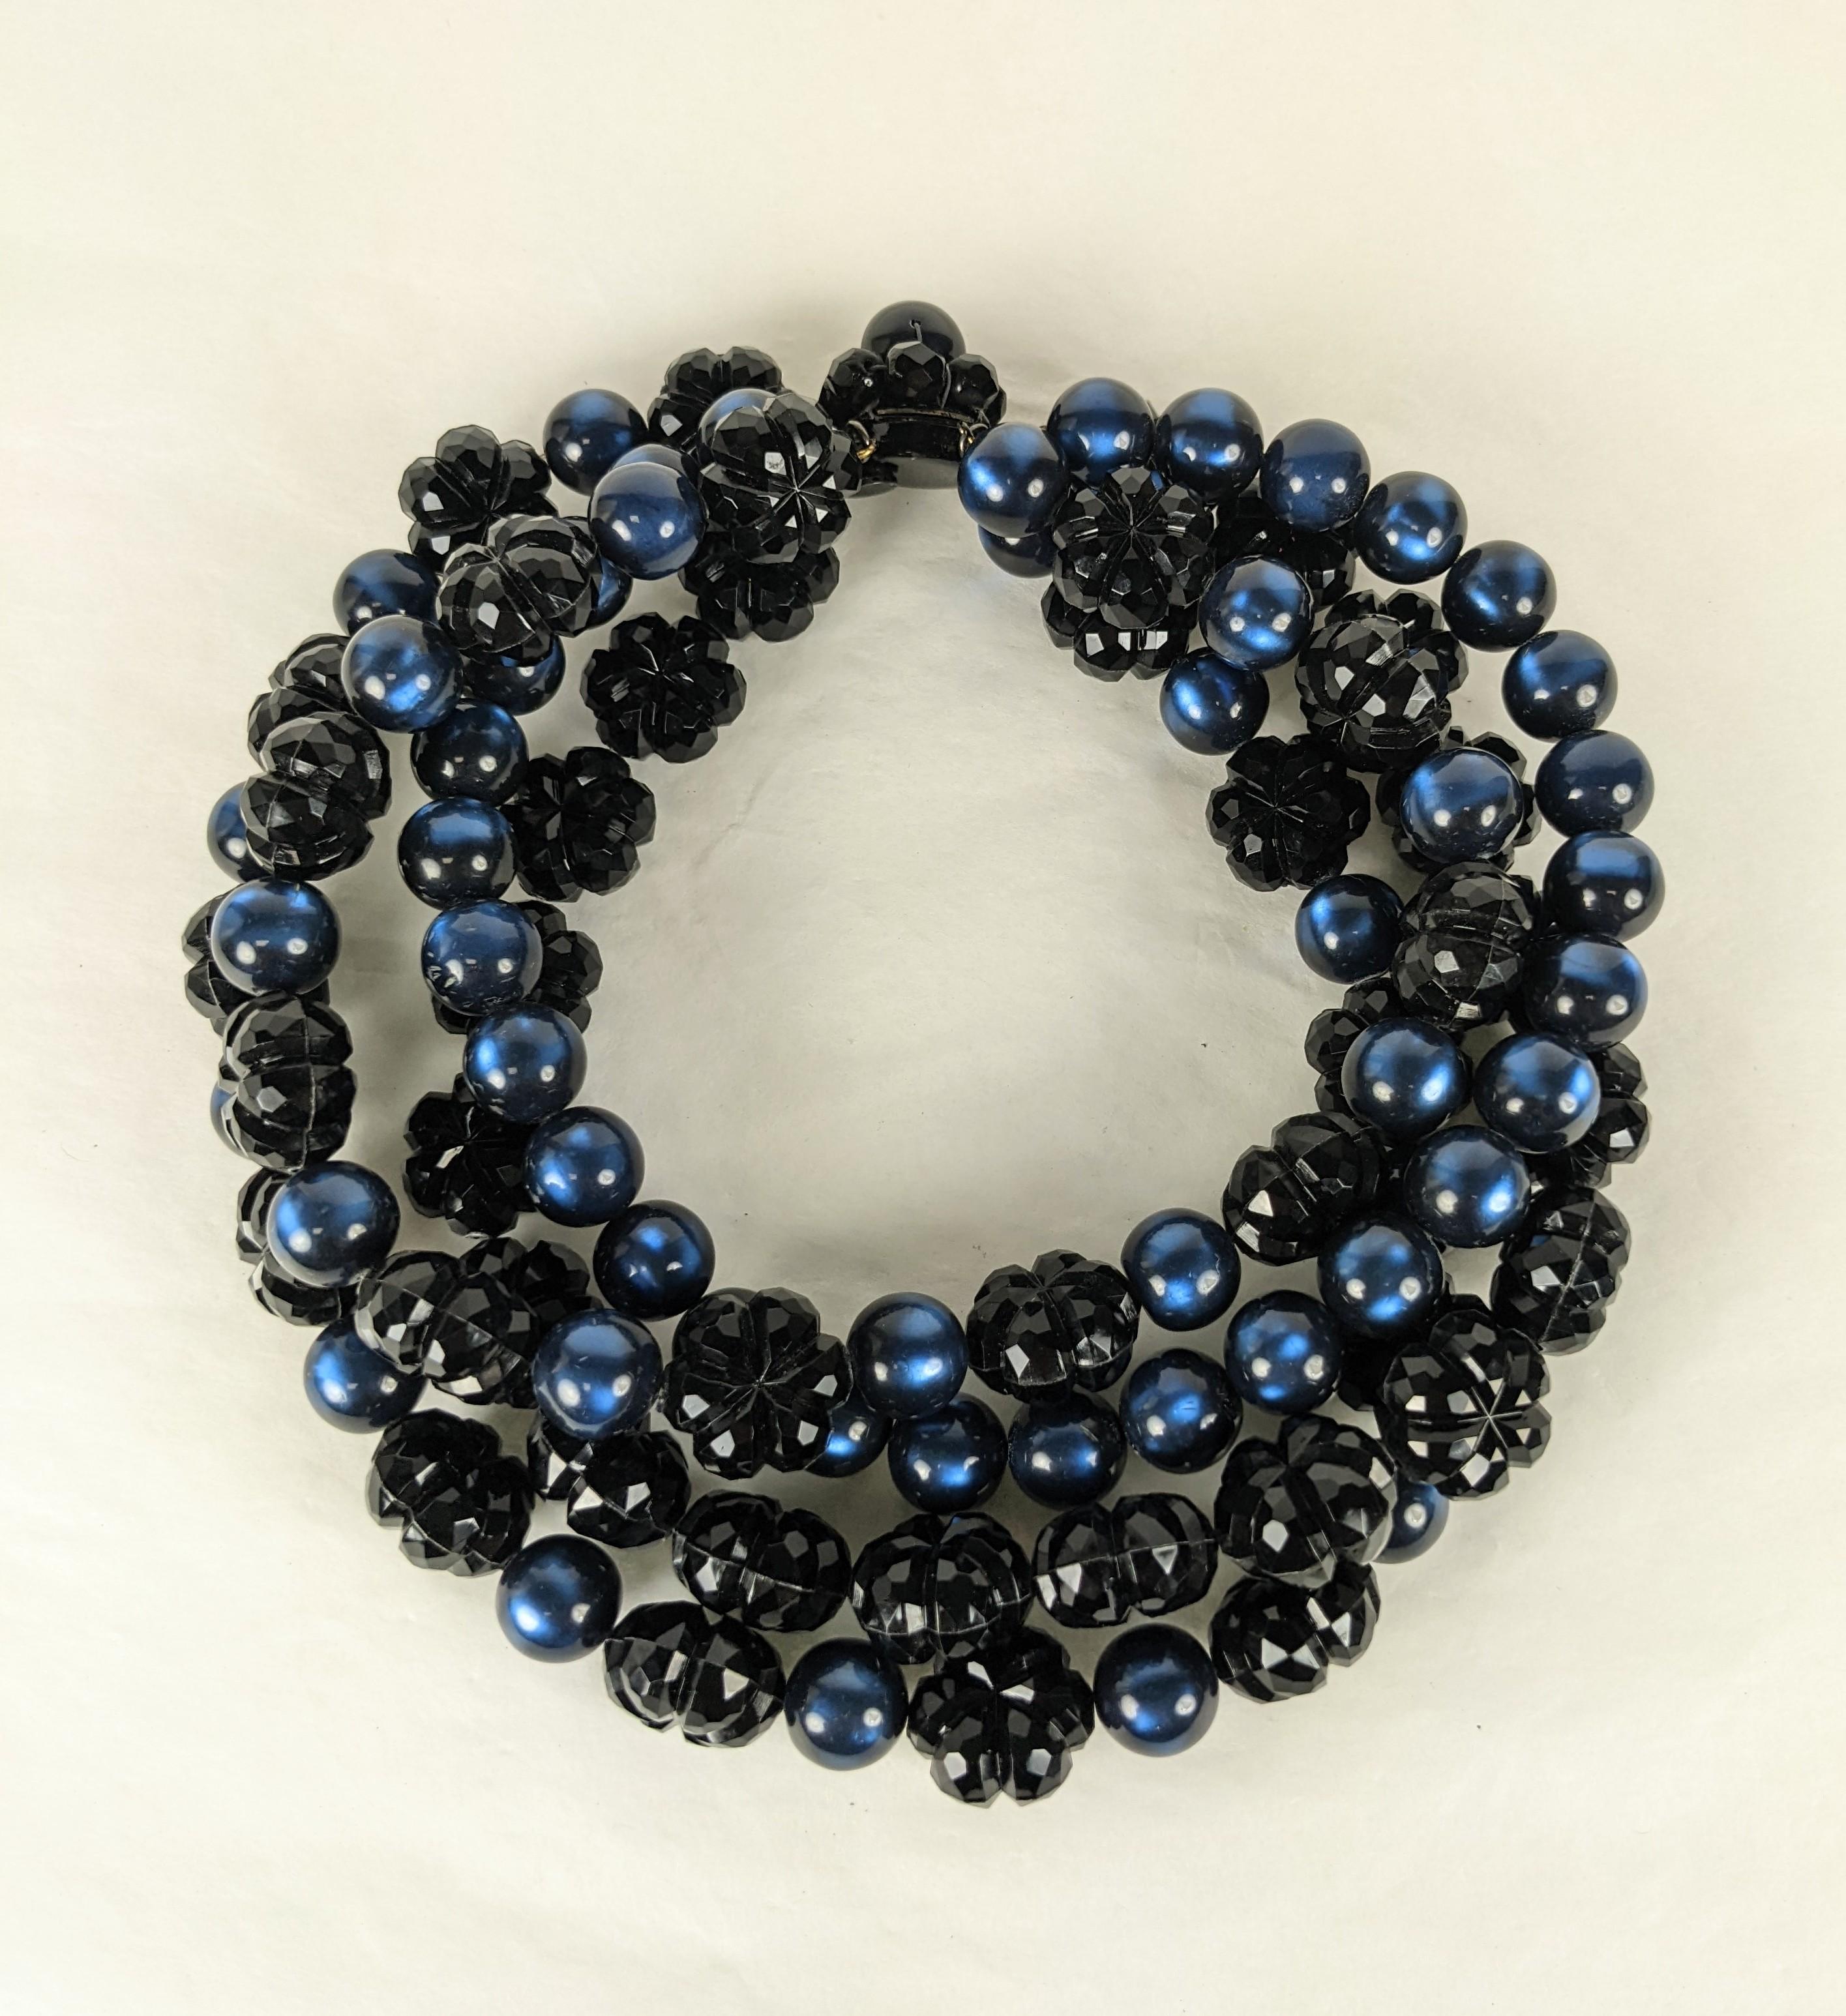 Hubert de Givenchy Haute Couture choker from the estate of Bunny Mellon. Composed of  4 strands of large faceted jet bead hand sewn flower heads and moonglow cats eye deep sapphire resin beads. Japanned black enameled  metal clasp. Made in